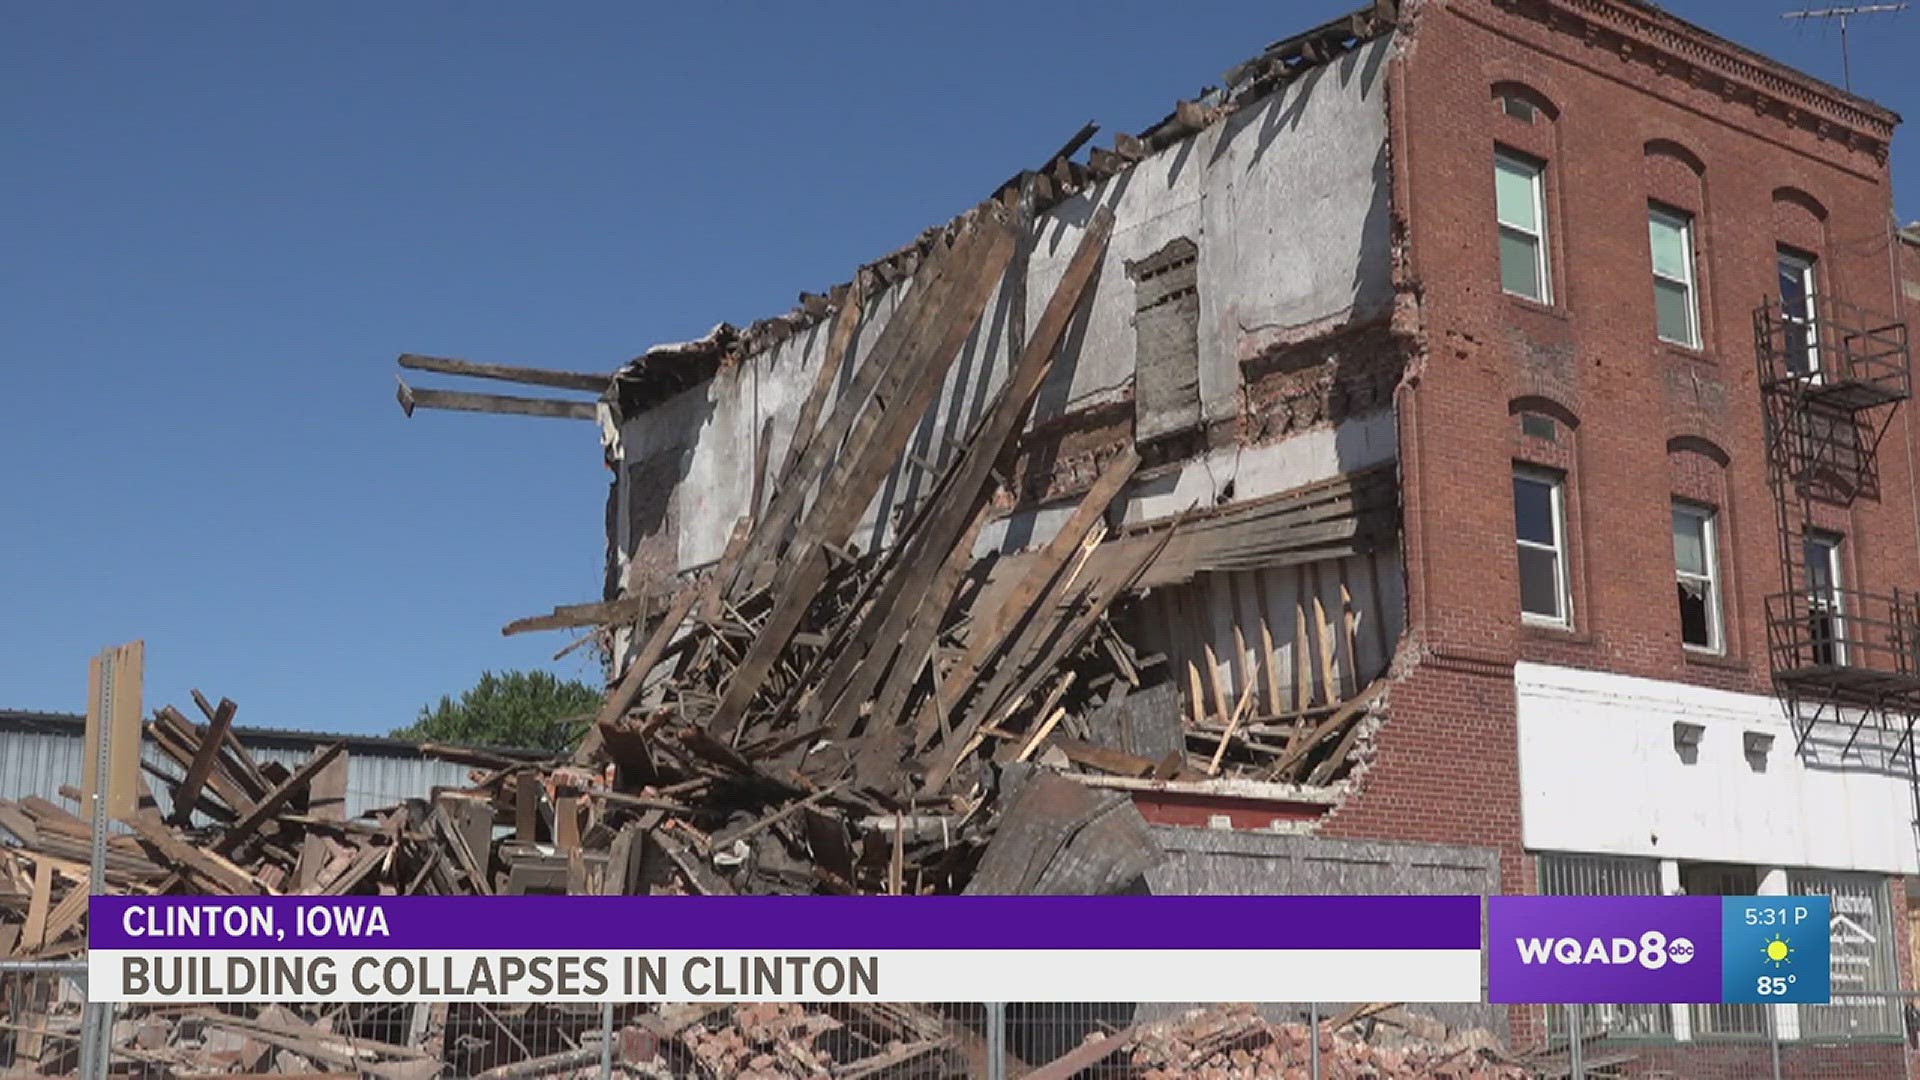 The city-owned building, located at 1006-1008 South 4th Street, collapsed Friday. Clinton city officials said they have no reason to believe anyone was inside.